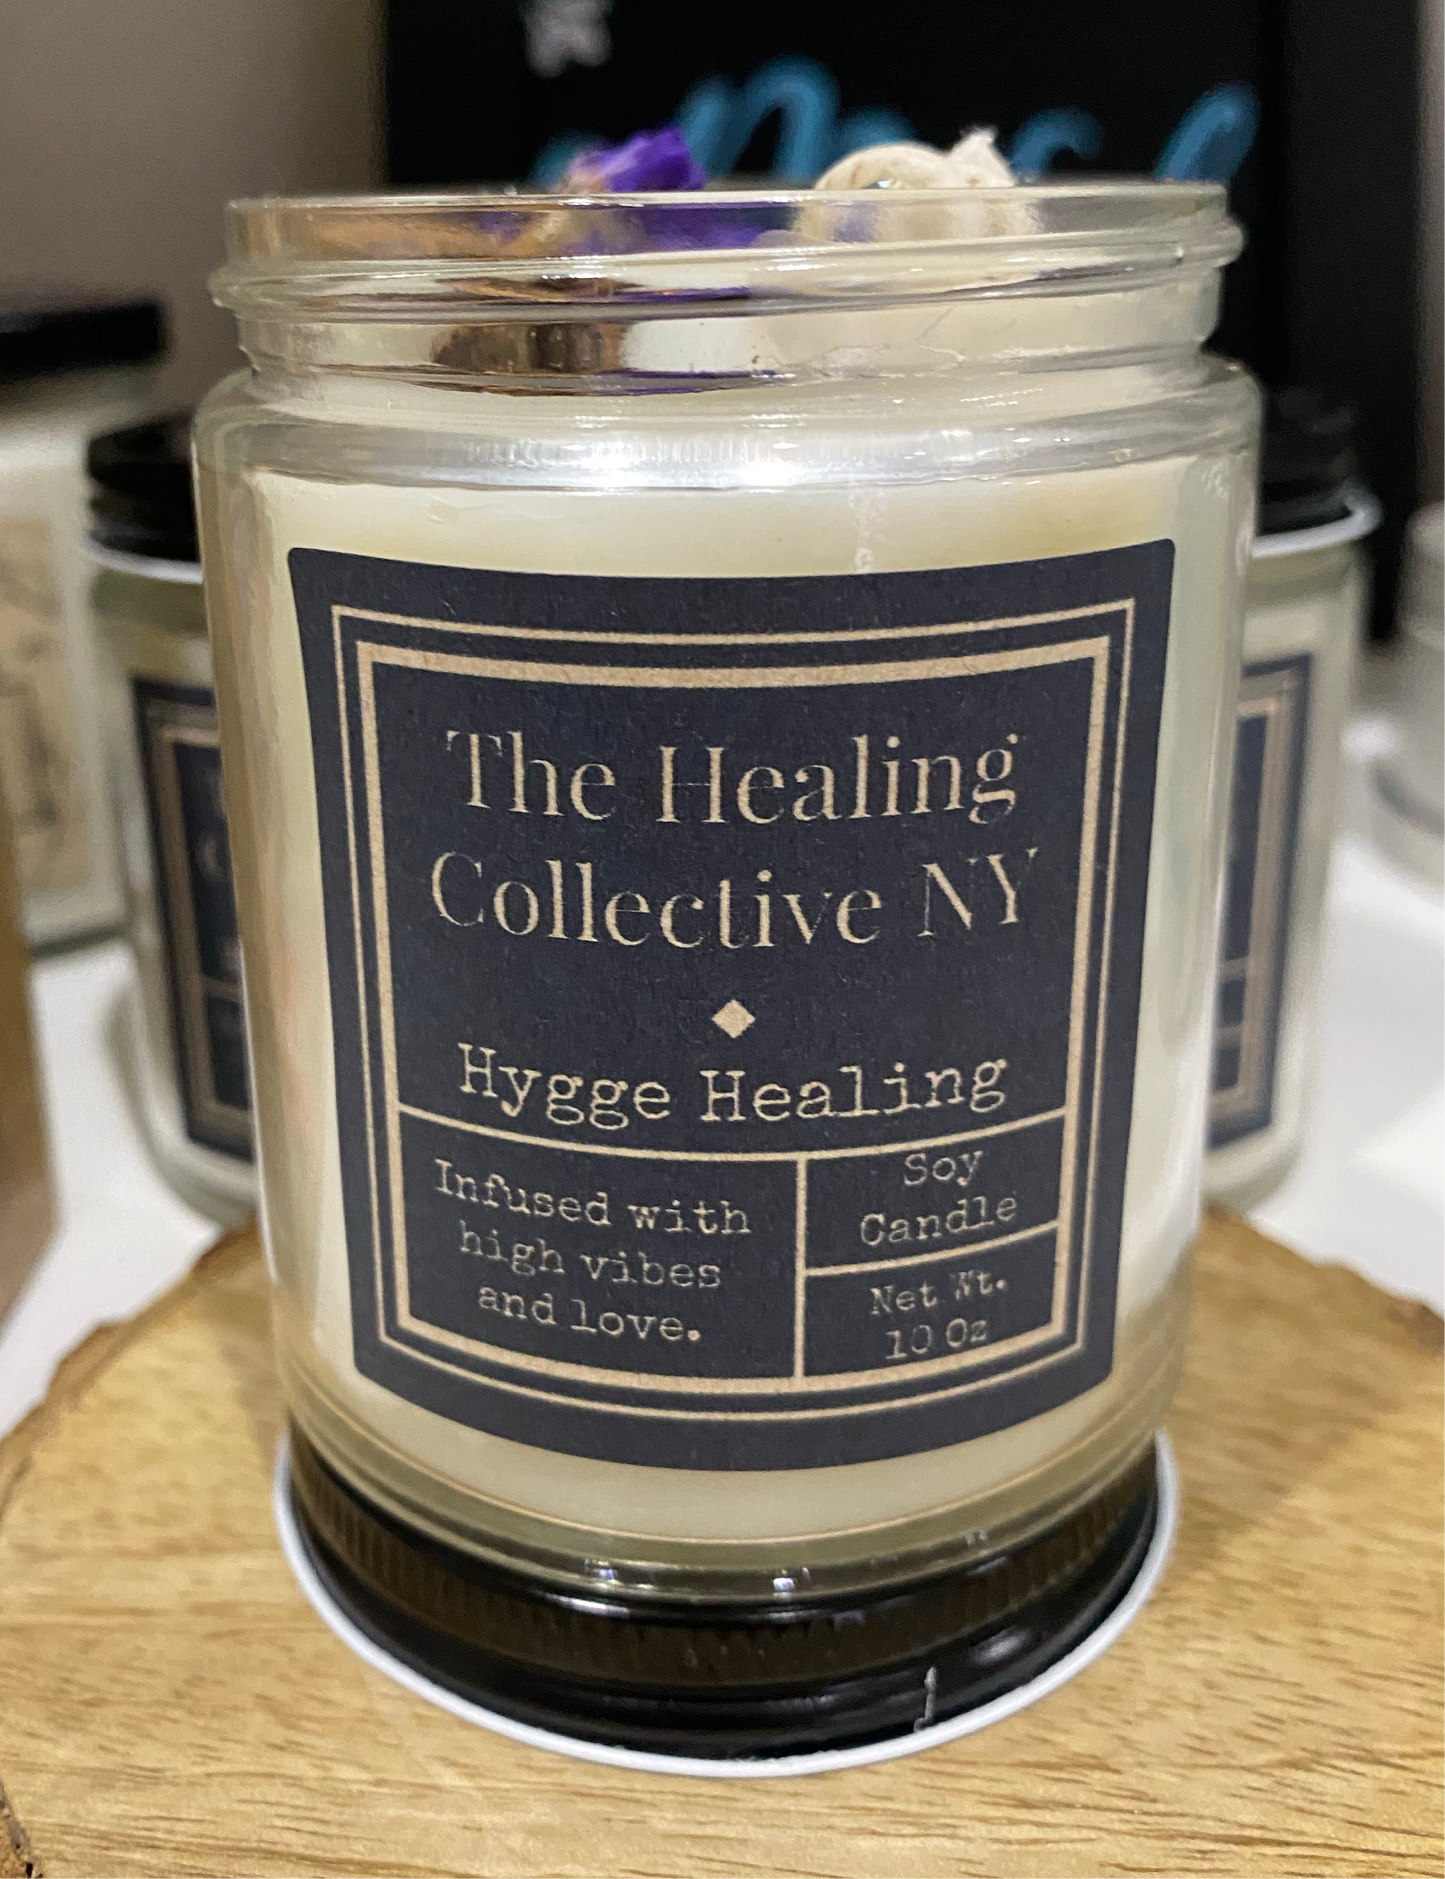 Hygge Healing Candle - The Healing Collective NY 